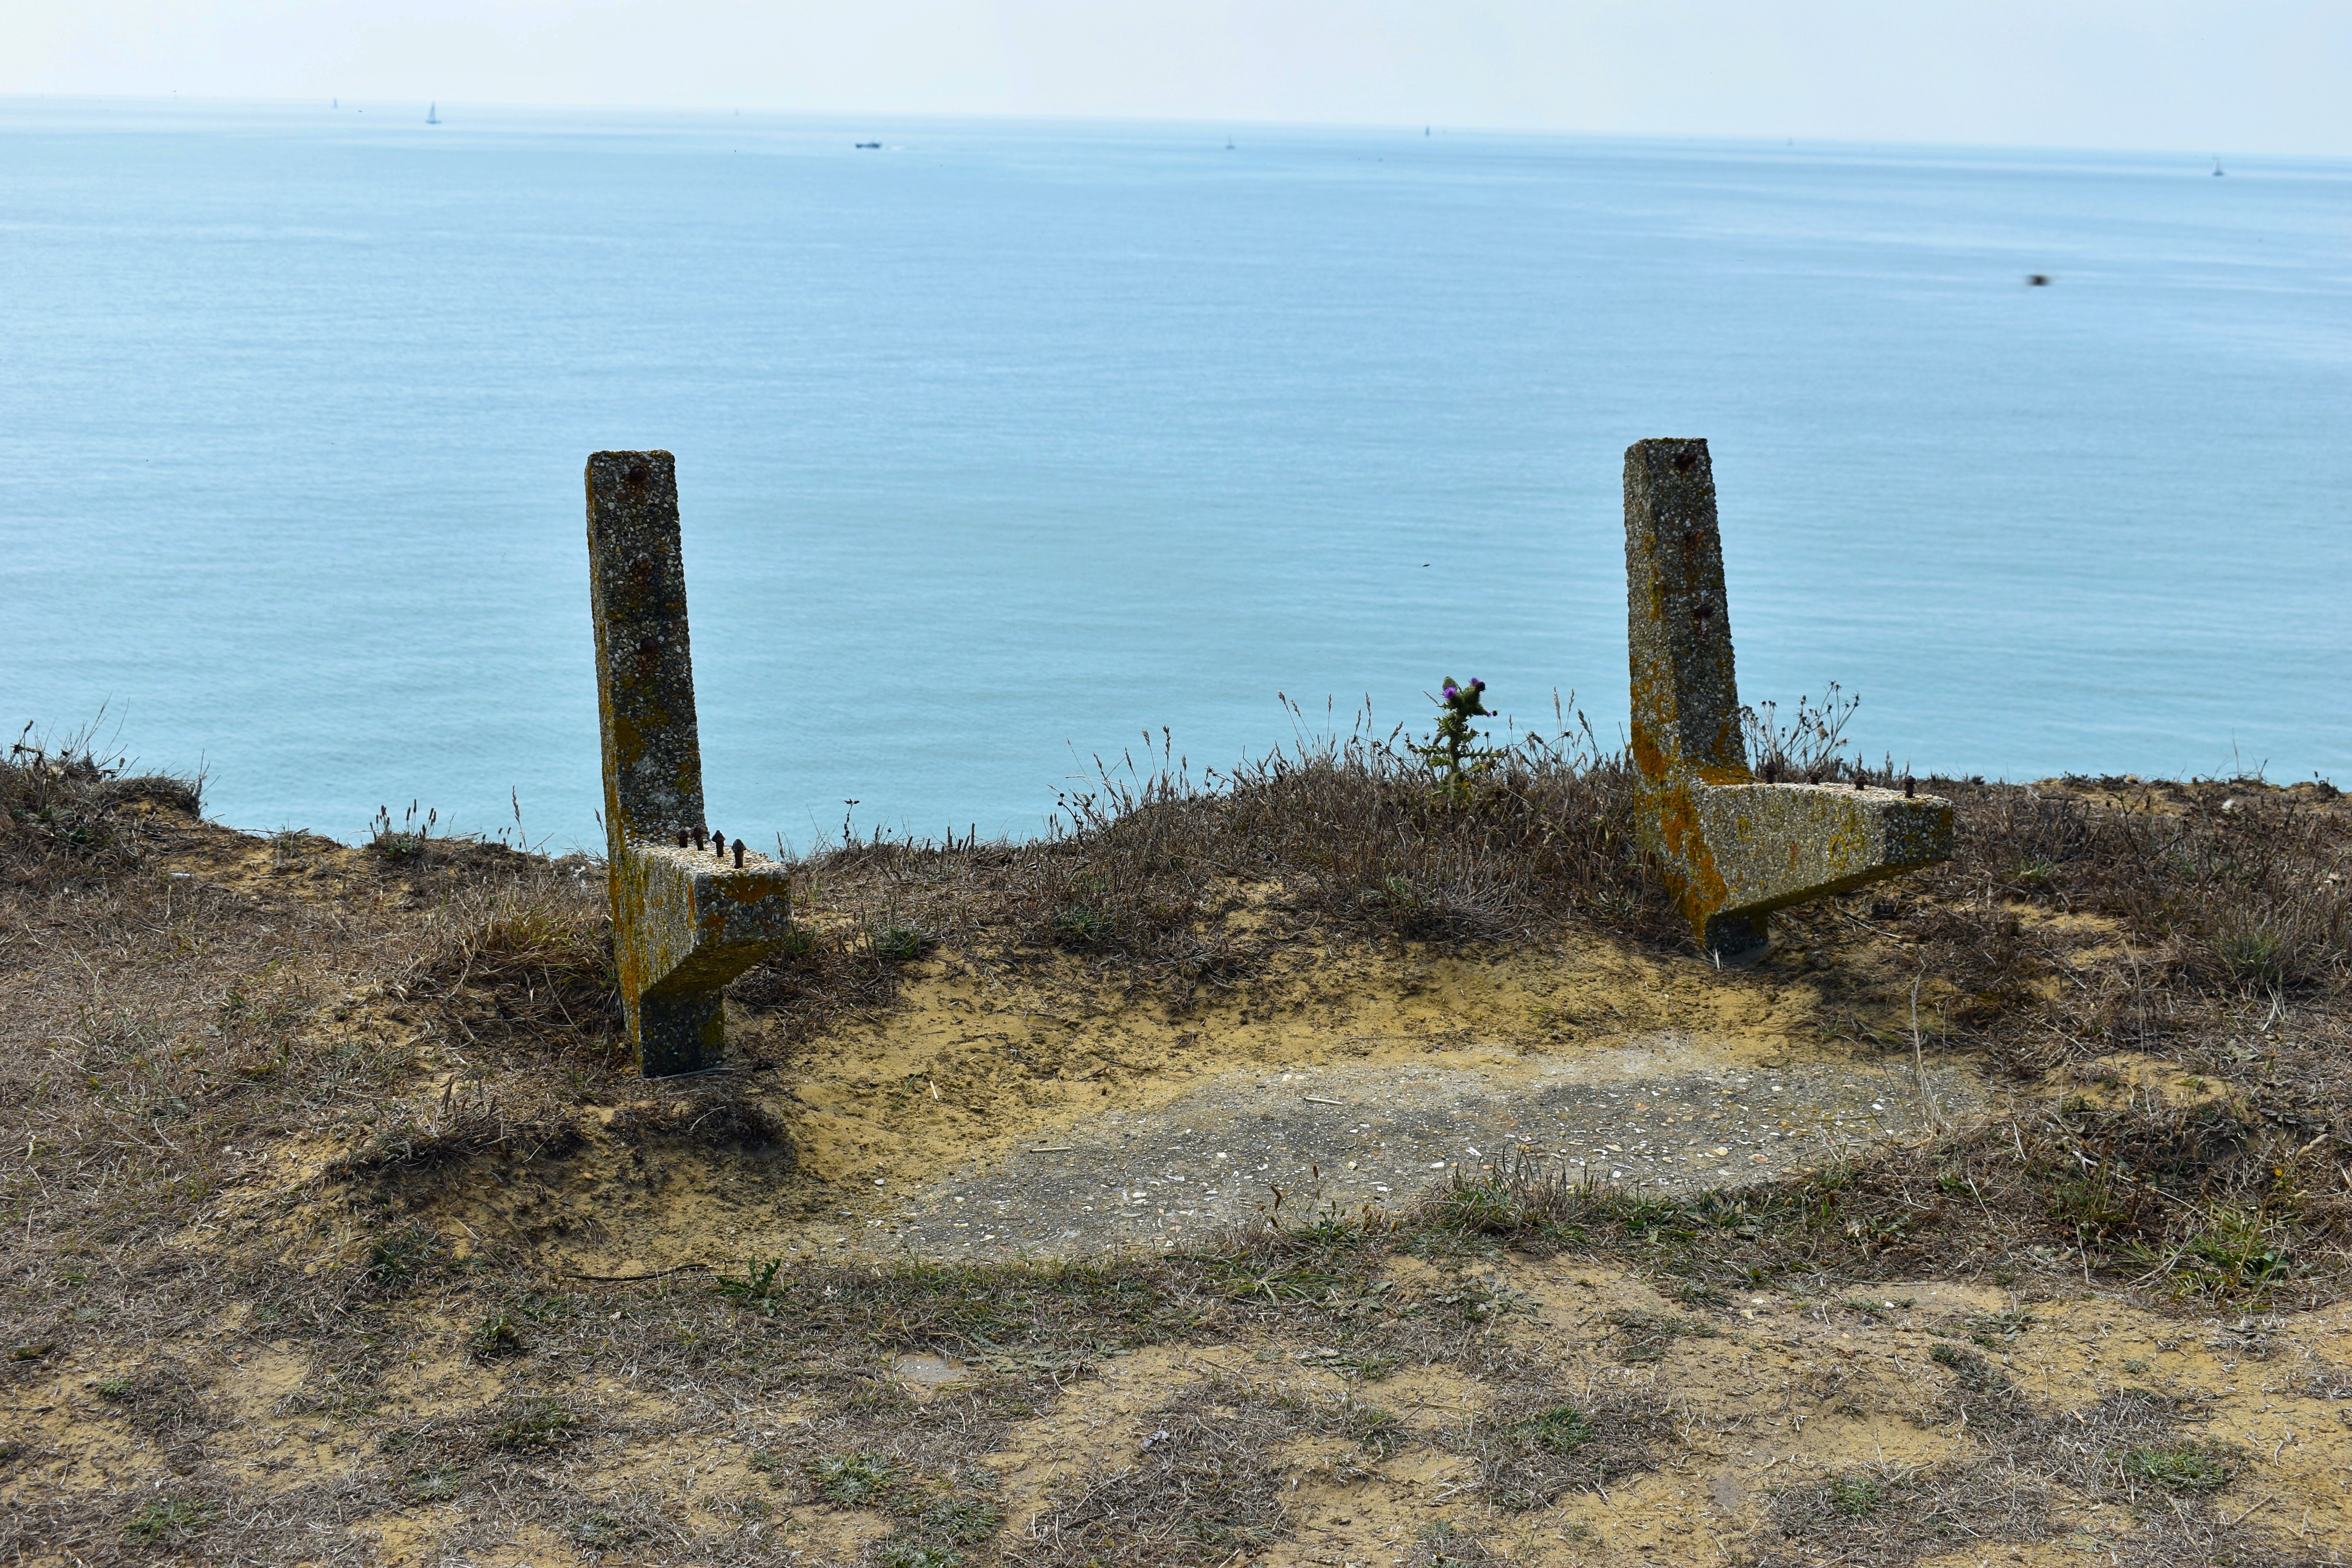 Figure 4.
Bench removed due to landslide risk.
Route from Barton on Sea to Hurst Spit. Image taken by Isobel Akerman, 2020